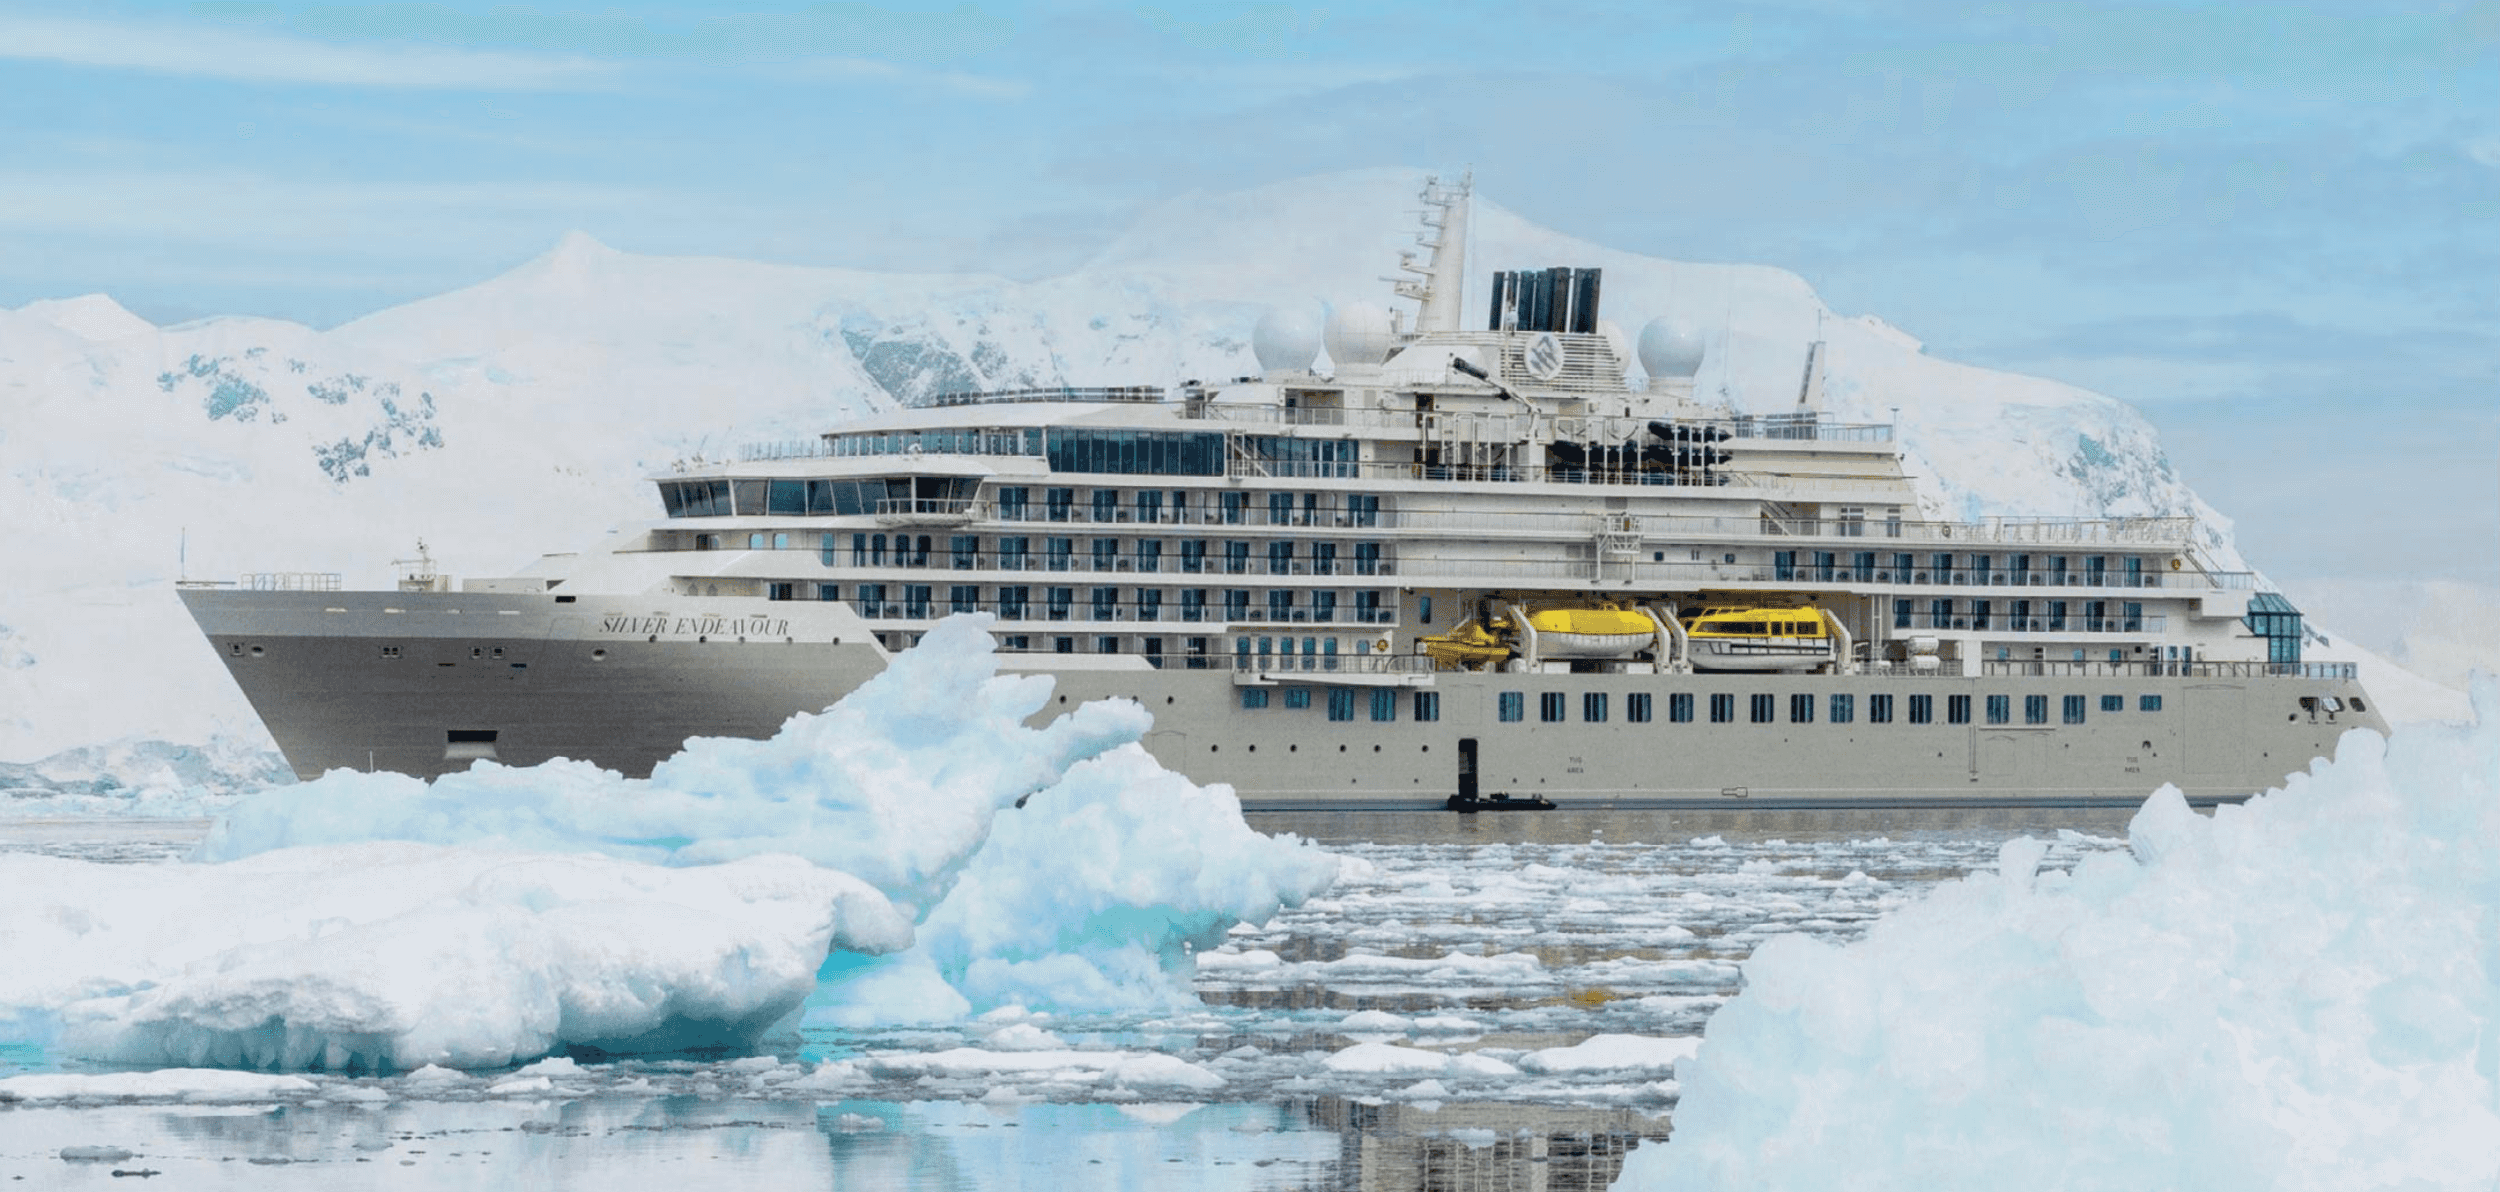 Silversea’s Silver Endeavor has a 220-passenger capacity which promotes an ultra-luxurious expedition experience